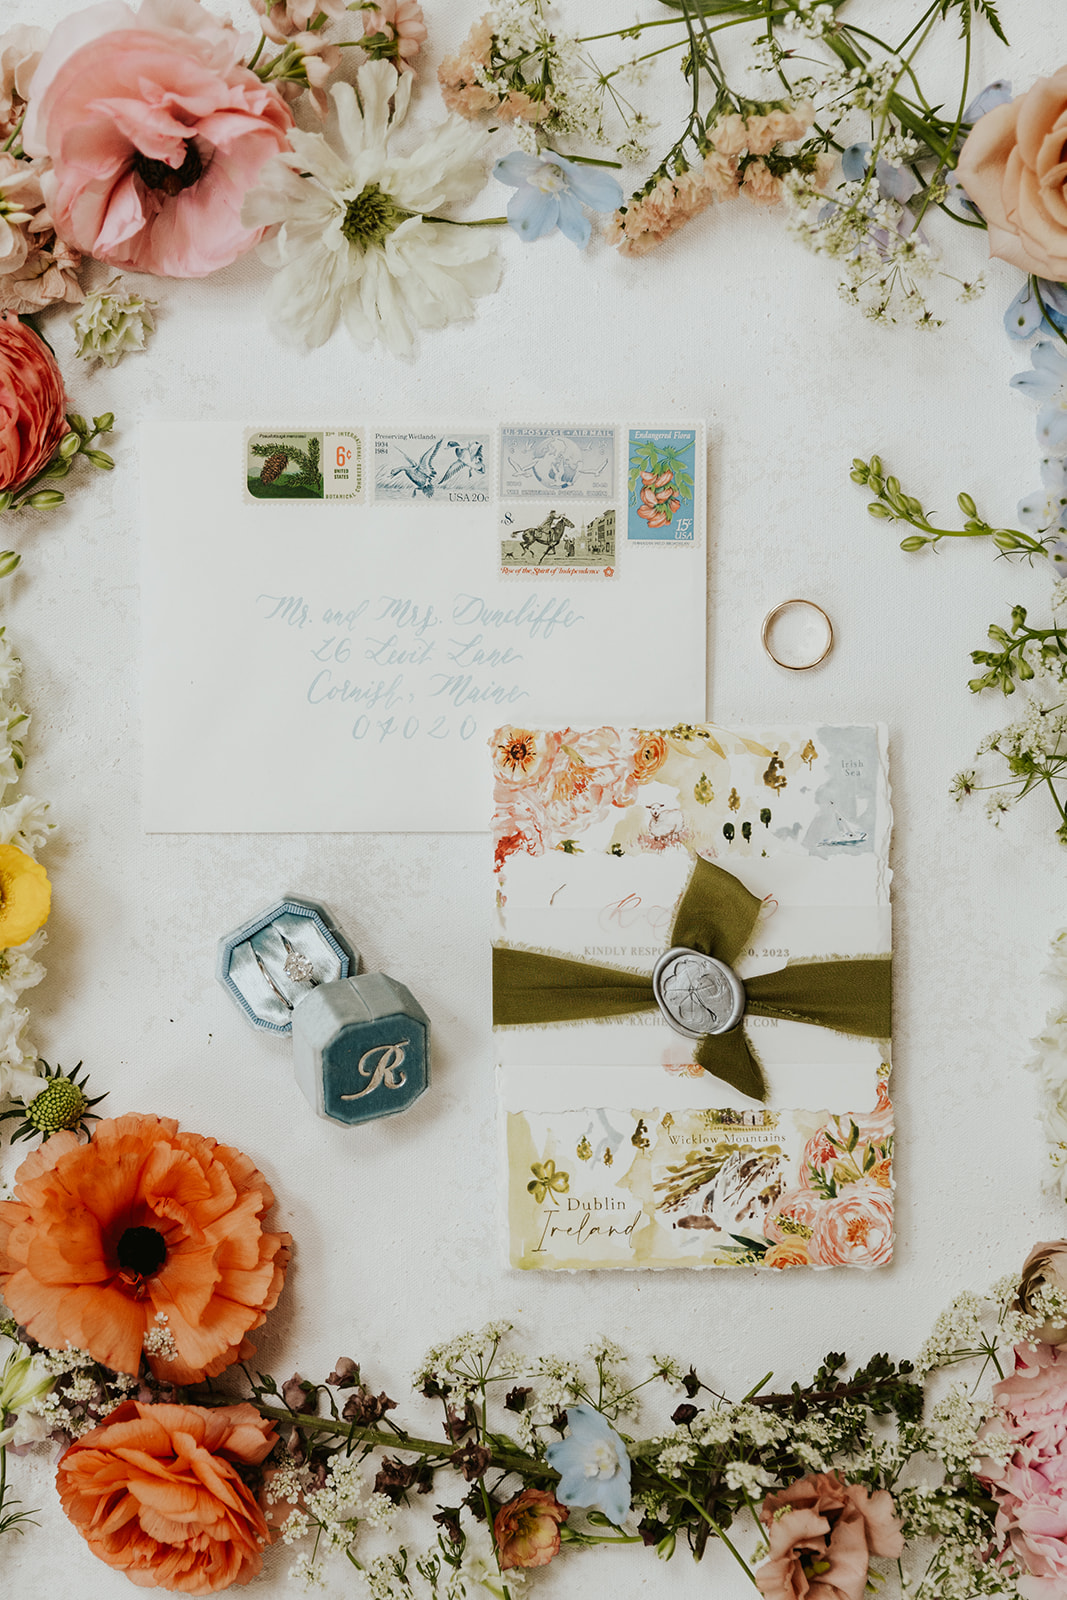 Floral wedding invitation in a flatlay with flowers surrounding